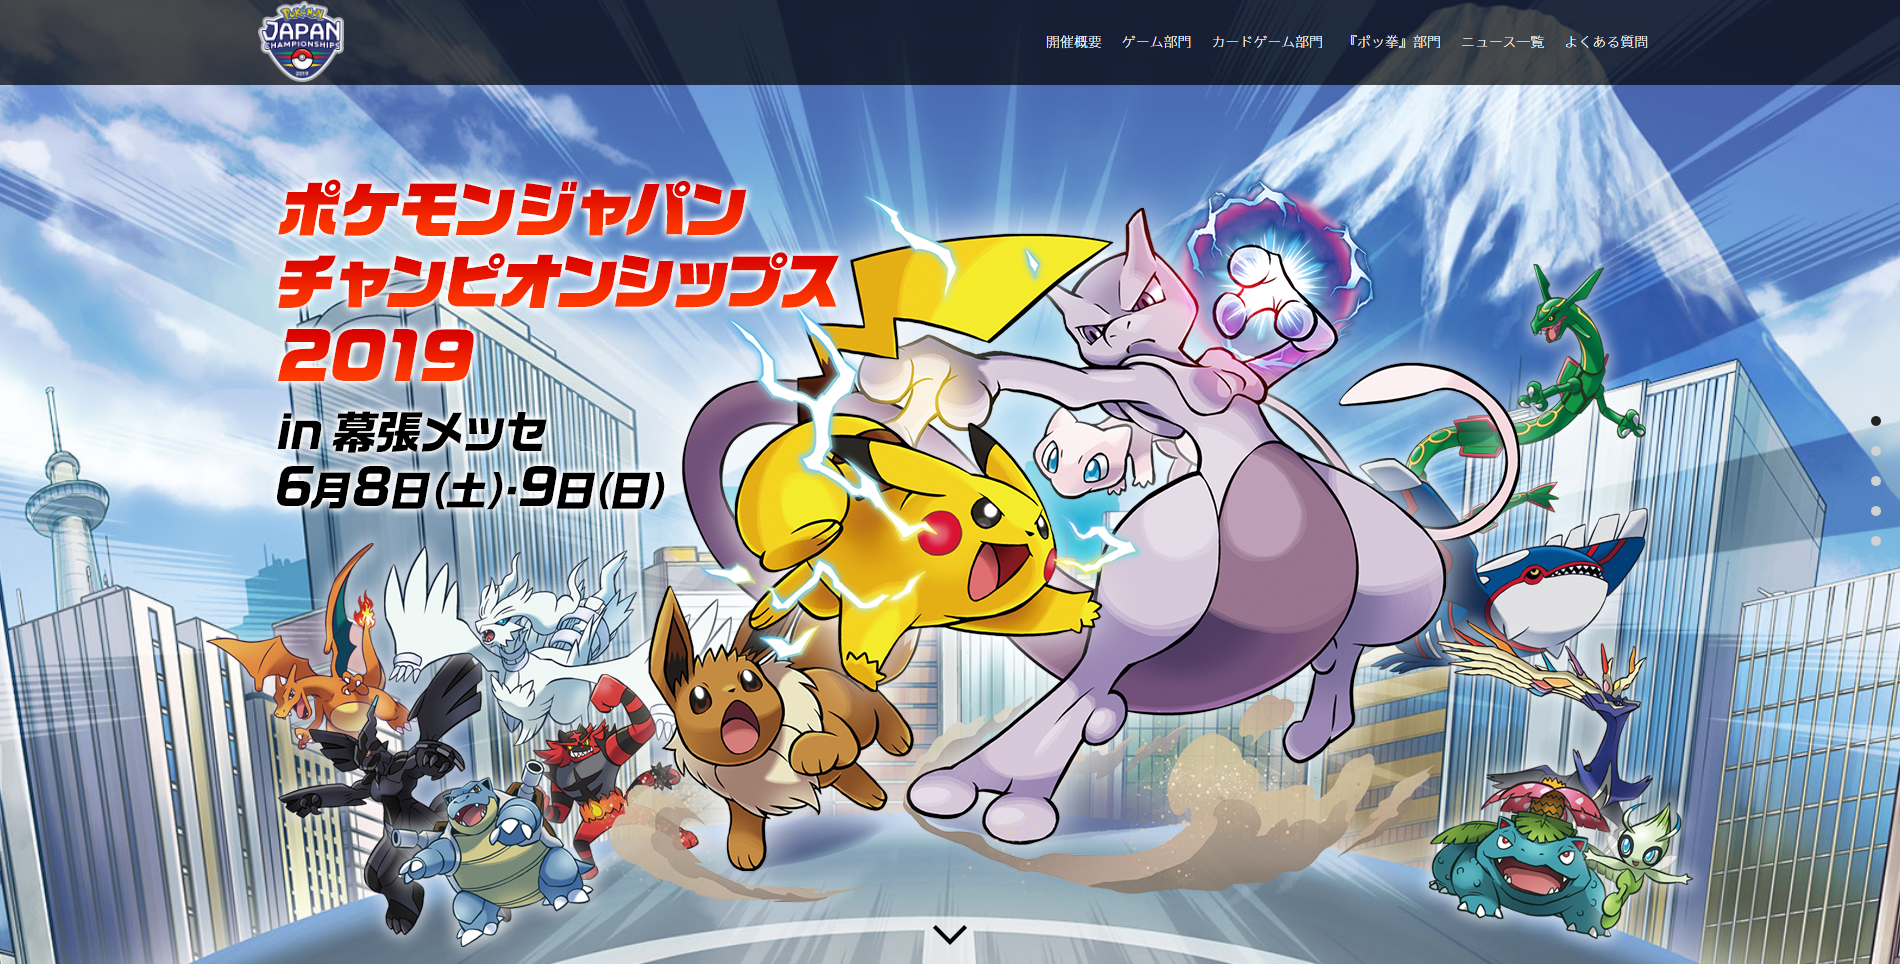 Pjcs19 Nidoqueen Japanese Project Pokemon Forums